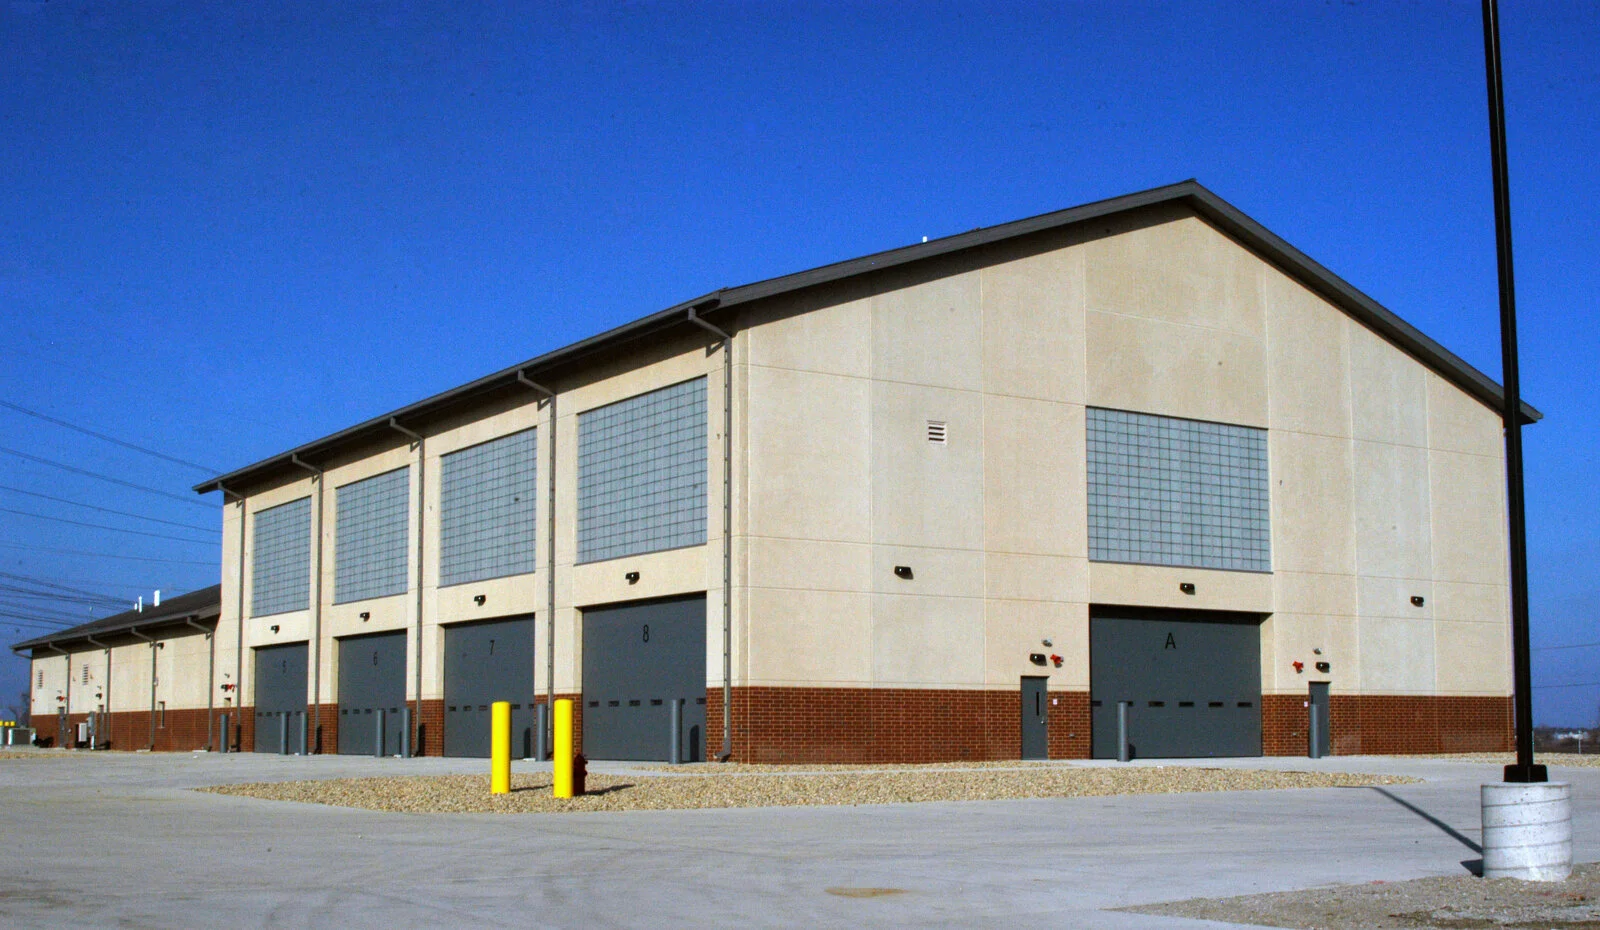 Exterior US Army T.E.M.F. Facility, neutral toned building with red brick at the bottom, large garage doors with equal sized windows above garage doors, bollards around building, photo taken on a sunny day.